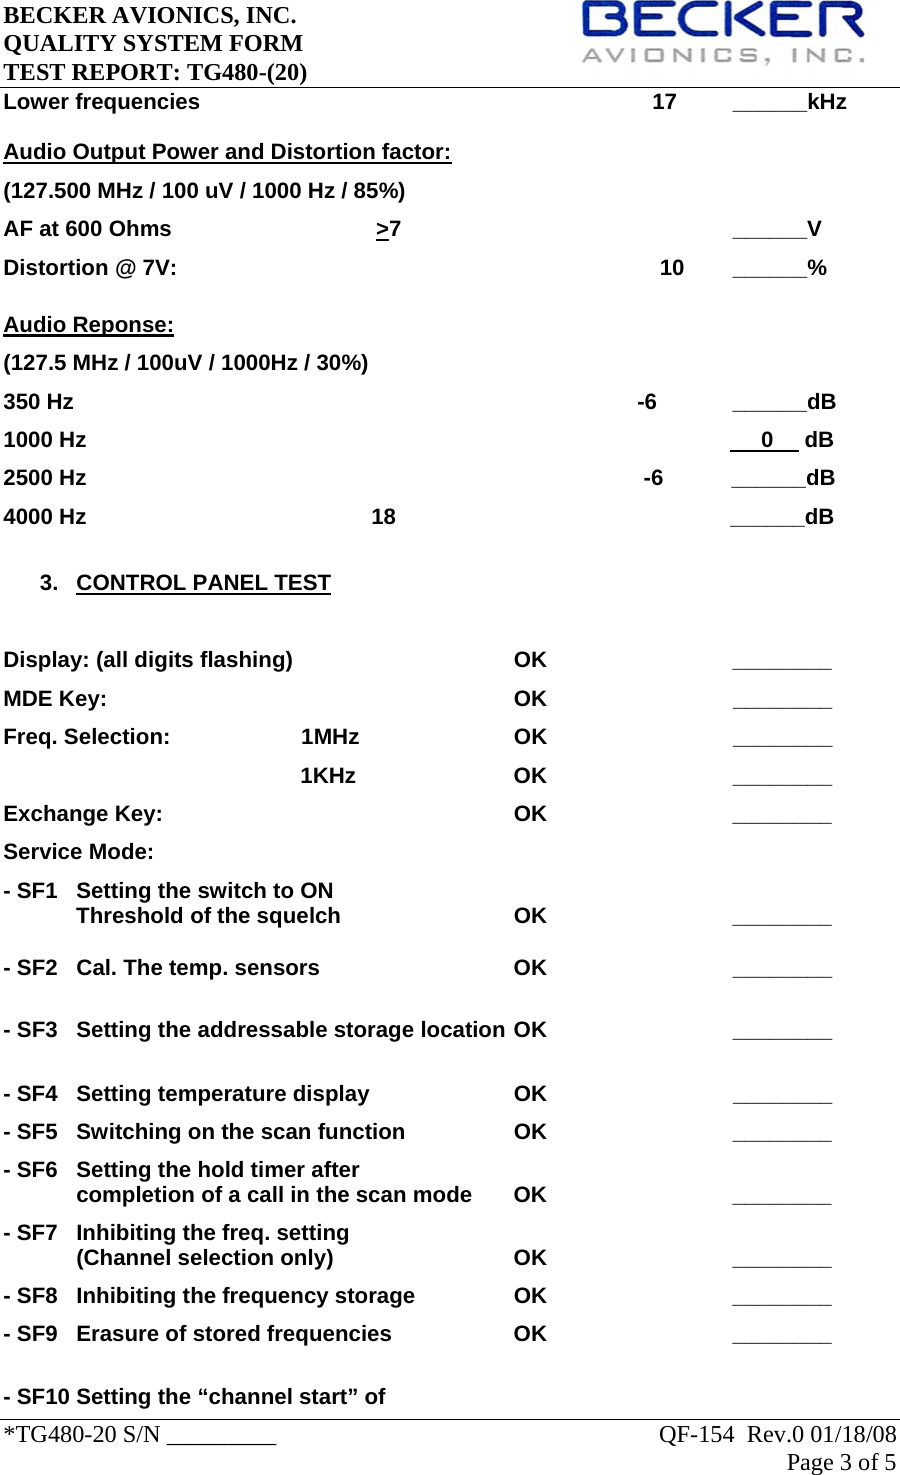 BECKER AVIONICS, INC.     QUALITY SYSTEM FORM TEST REPORT: TG480-(20)   *TG480-20 S/N _________                                                               QF-154  Rev.0 01/18/08 Page 3 of 5   Lower frequencies                                                                         17         ______kHz Audio Output Power and Distortion factor: (127.500 MHz / 100 uV / 1000 Hz / 85%) AF at 600 Ohms                                 &gt;7                                                     ______V Distortion @ 7V:       10 ______%  Audio Reponse: (127.5 MHz / 100uV / 1000Hz / 30%) 350 Hz                                                                                           -6   ______dB 1000 Hz                                                                                                             0     dB 2500 Hz                                                                                          -6           ______dB 4000 Hz                                              18                                                      ______dB  3. CONTROL PANEL TEST  Display: (all digits flashing)    OK   ________ MDE Key:            OK                              ________ Freq. Selection:      1MHz                  OK                              ________                                                 1KHz                  OK                              ________ Exchange Key:     OK   ________ Service Mode: - SF1   Setting the switch to ON Threshold of the squelch      OK      ________  - SF2  Cal. The temp. sensors      OK                              ________   - SF3  Setting the addressable storage location OK                              ________  - SF4  Setting temperature display    OK                              ________ - SF5  Switching on the scan function    OK      ________ - SF6  Setting the hold timer after  completion of a call in the scan mode  OK      ________  - SF7  Inhibiting the freq. setting (Channel selection only)   OK   ________ - SF8  Inhibiting the frequency storage    OK      ________ - SF9  Erasure of stored frequencies    OK      ________  - SF10 Setting the “channel start” of 